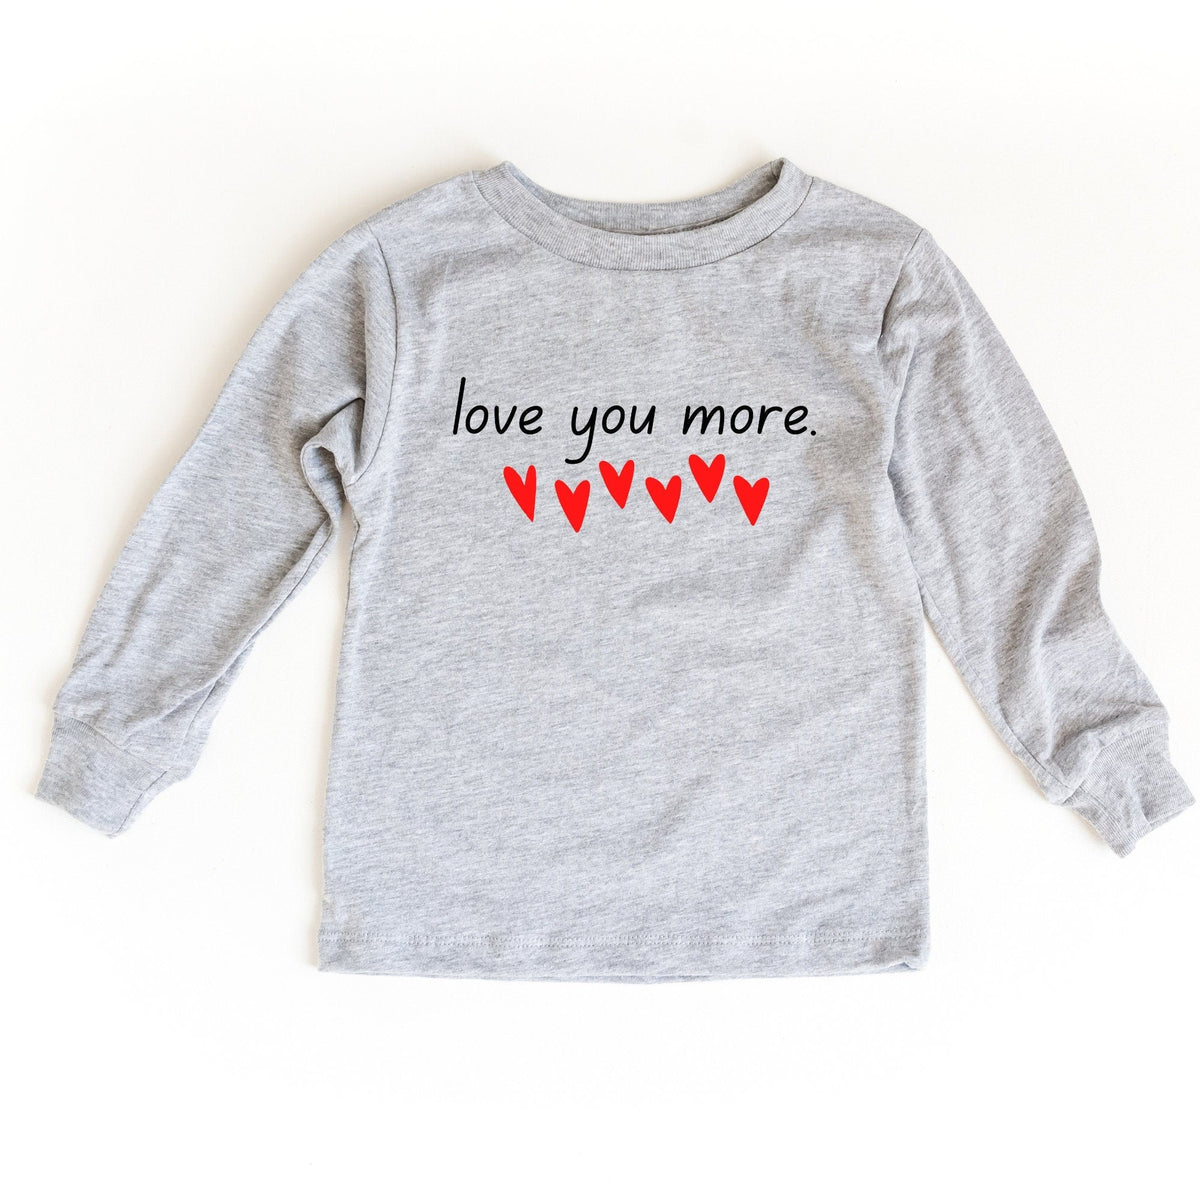 Love You More Toddler Long Sleeve Tee, Toddler Valentines Hearts Tee, Valentines Tee for Toddler Boys